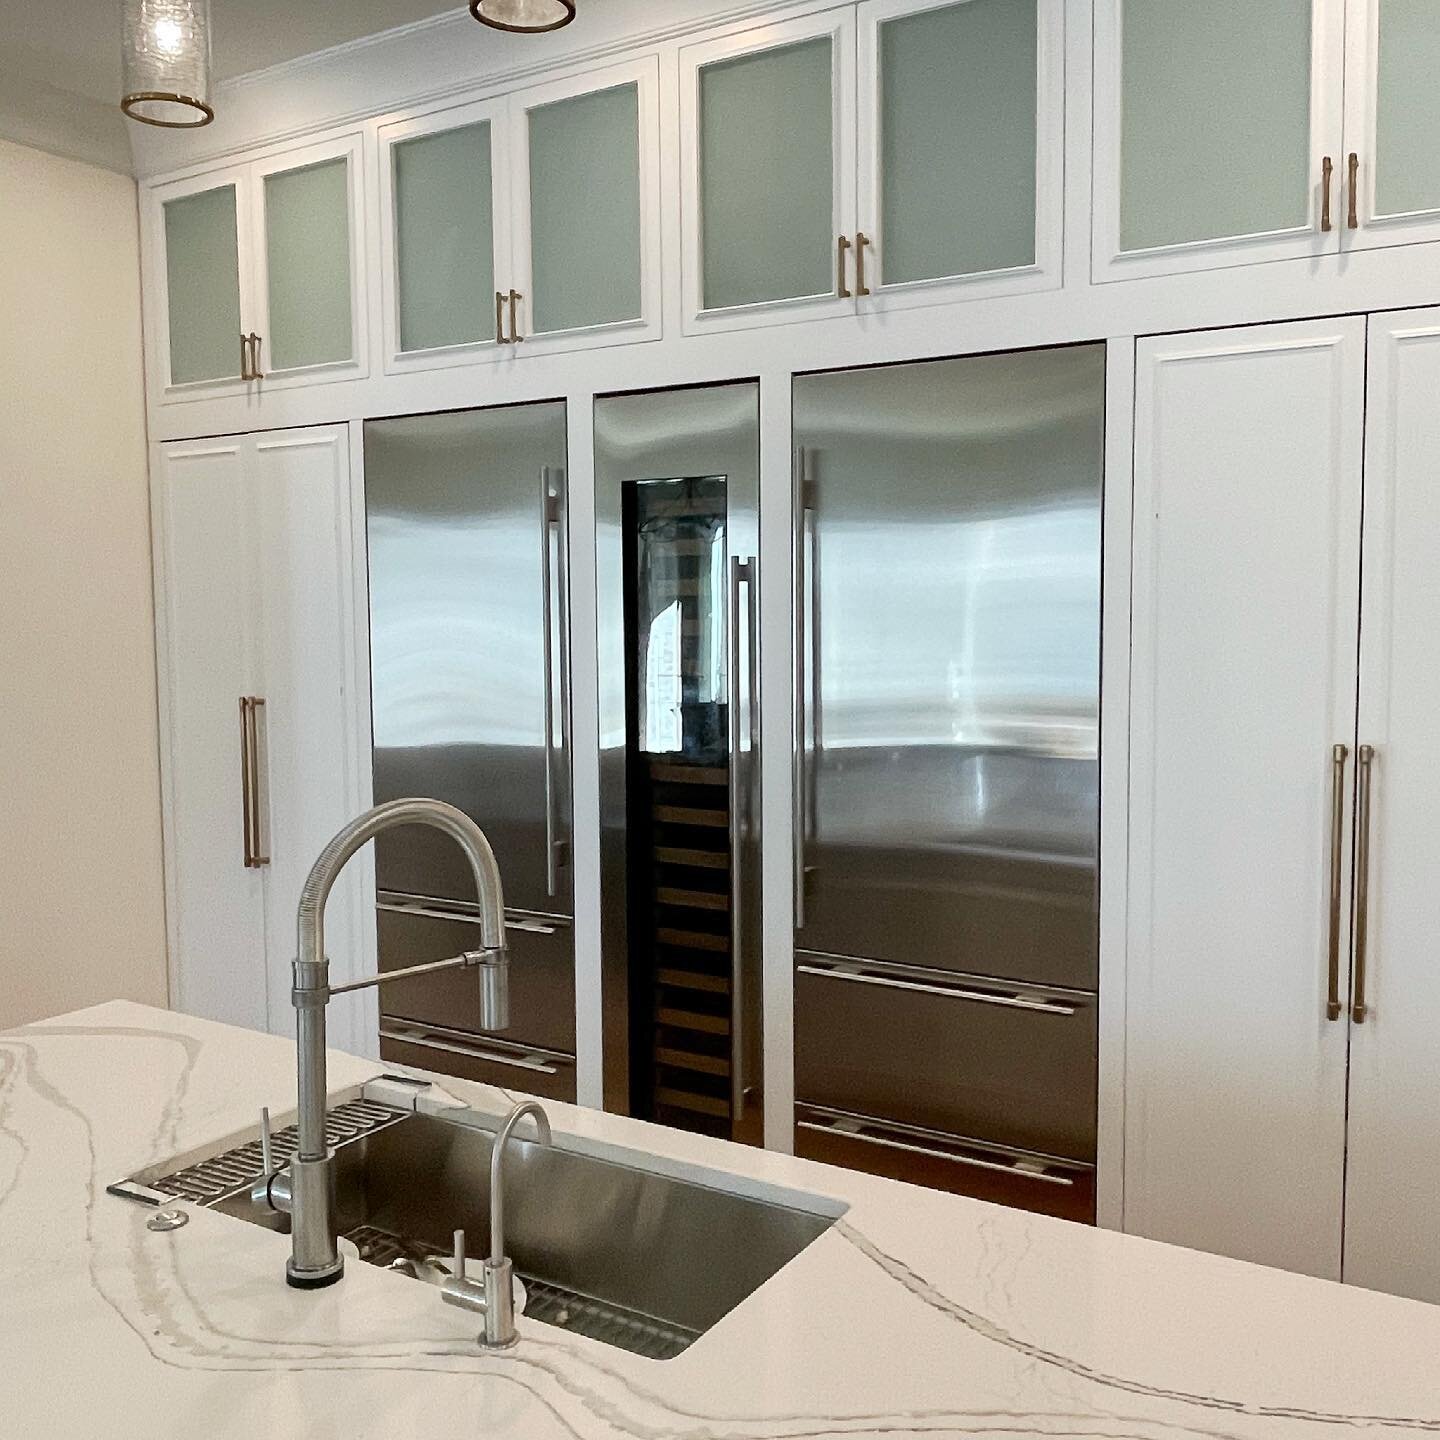 Did you know that you can split a sub zero fridge up? We do a lot of panel ready refrigerators because of the way they let your eye continue around the room. In this case we ordered stainless panels for this clients existing refrigerator to let them 